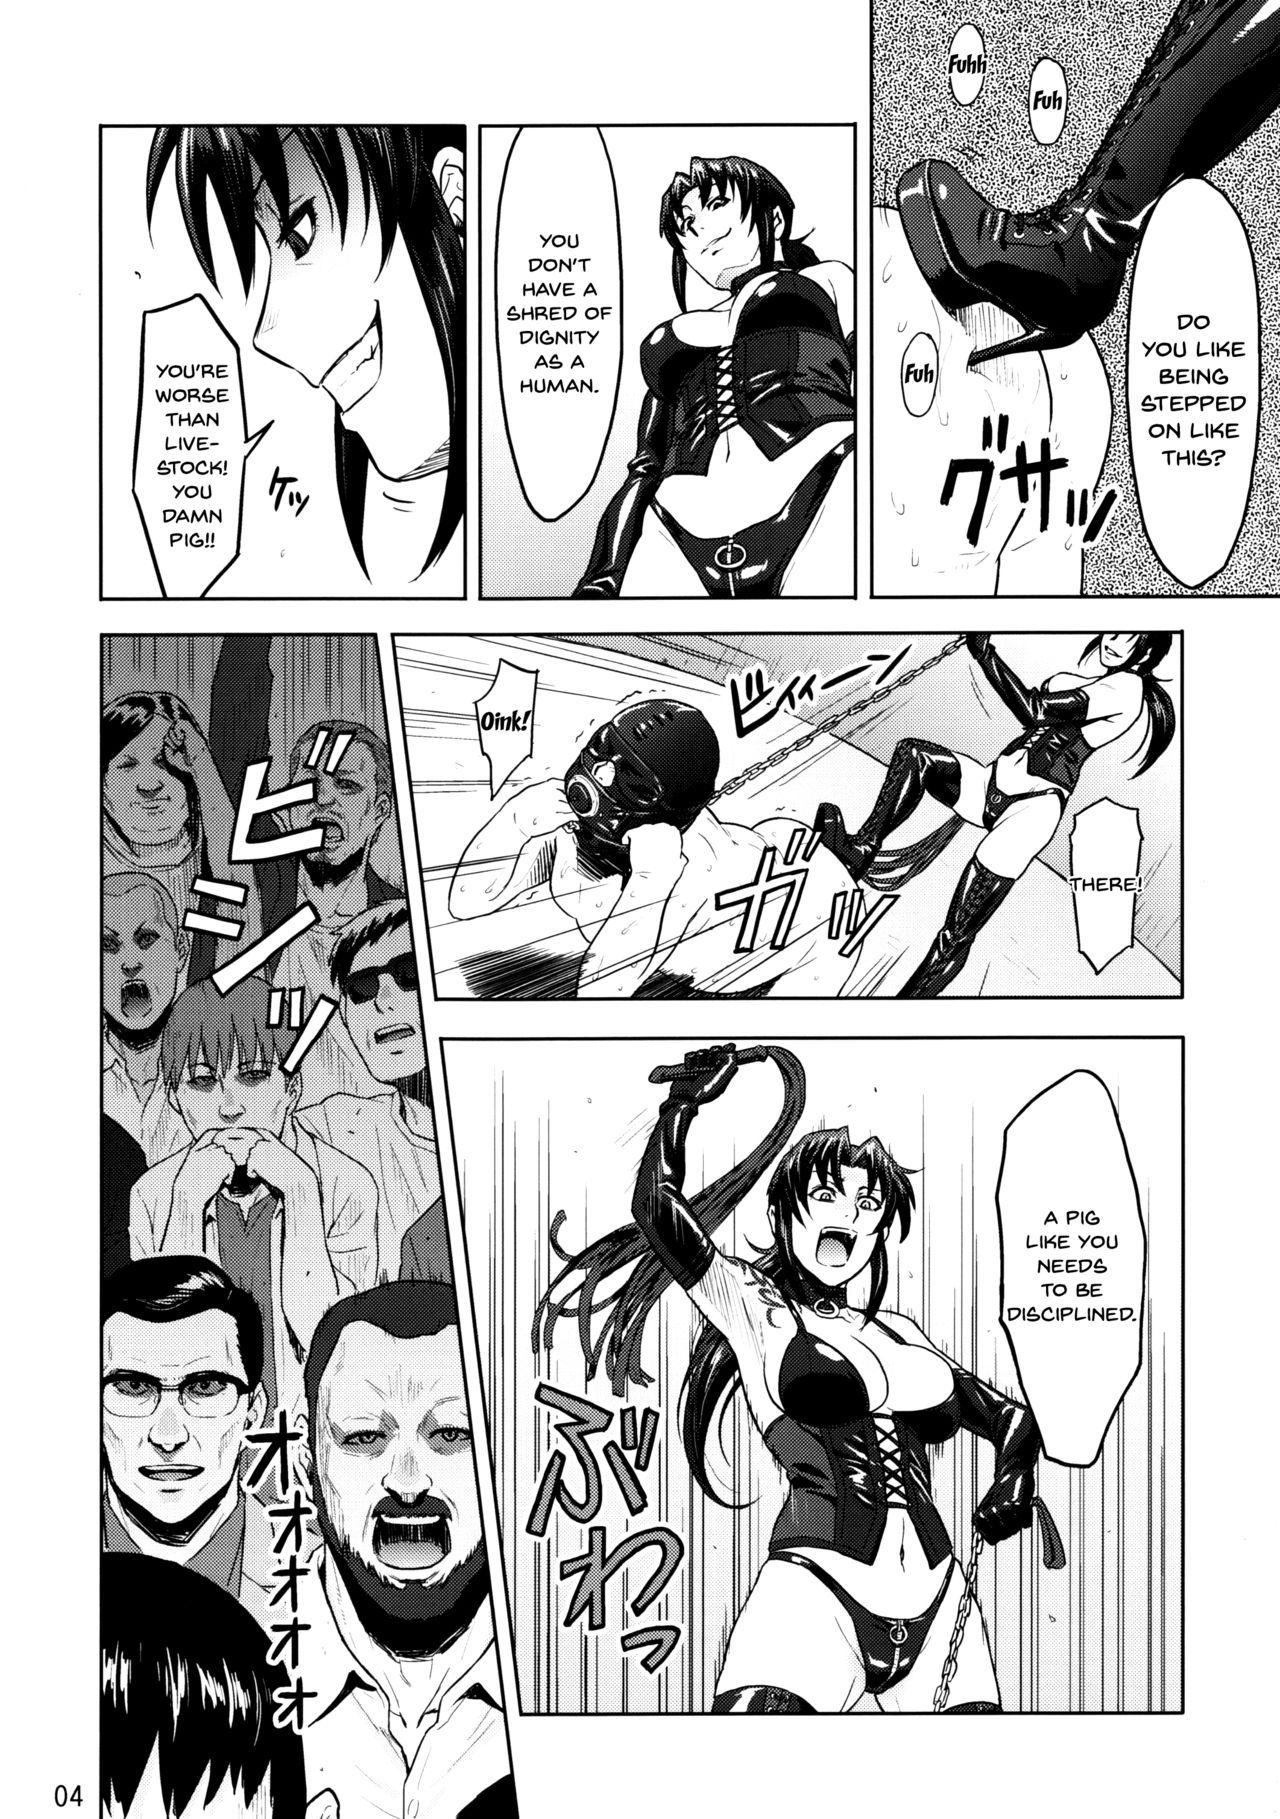 Freeporn My Sister Is A Pornstar Part 1 - Black lagoon Bwc - Page 10